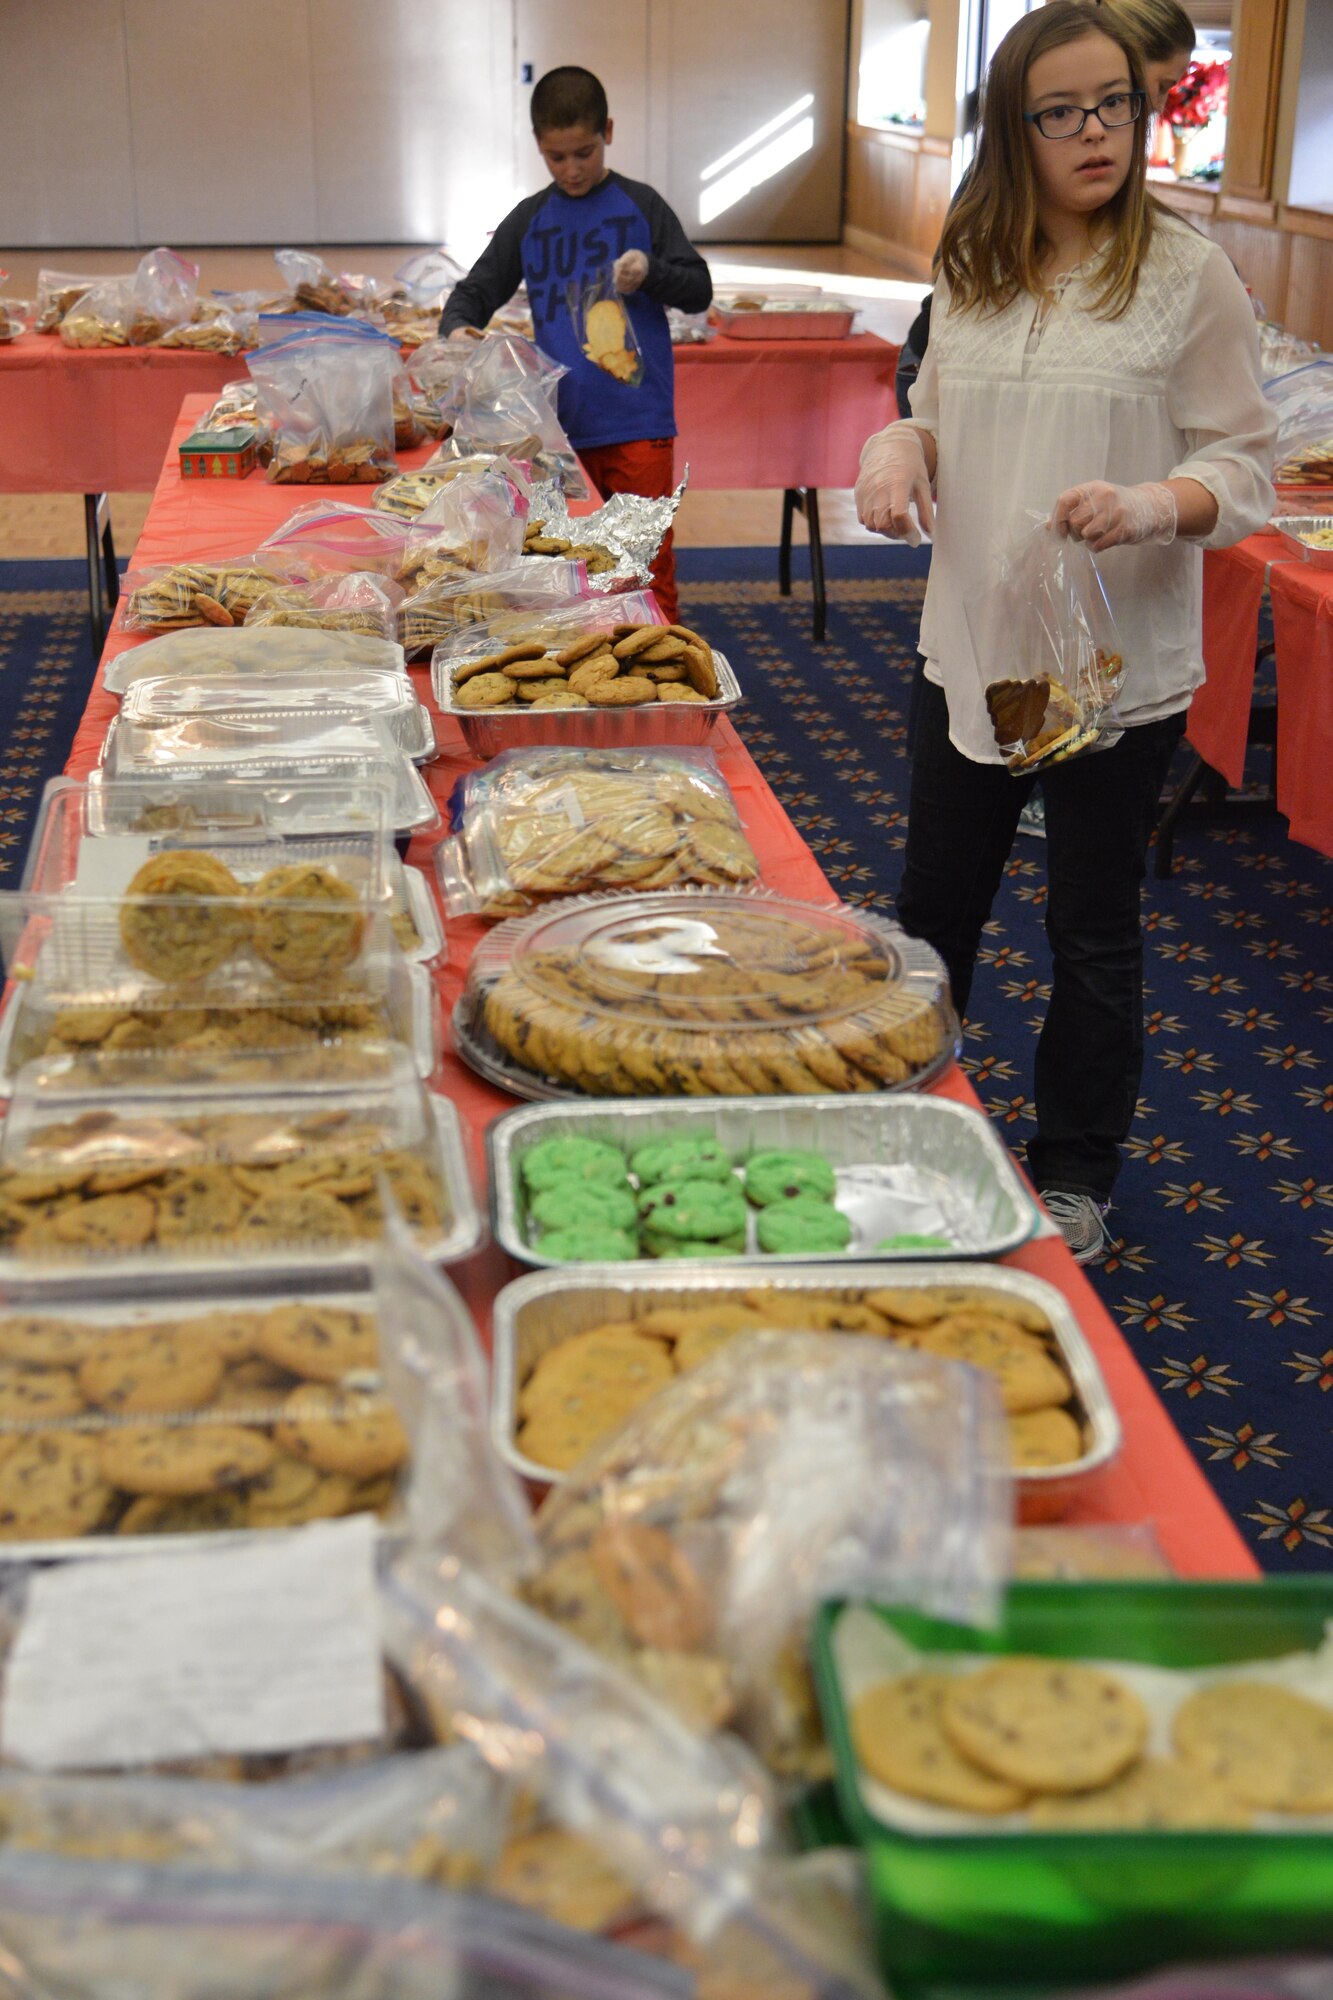 Volunteers help put together cookie packages to be delivered to Airmen living on base as part of the Kirtland Spouses’ Club's annual cookie drive. The KSC rolled past its goal of collecting about 10,000 cookie, collecting more than 12,000 cookies from the base community.